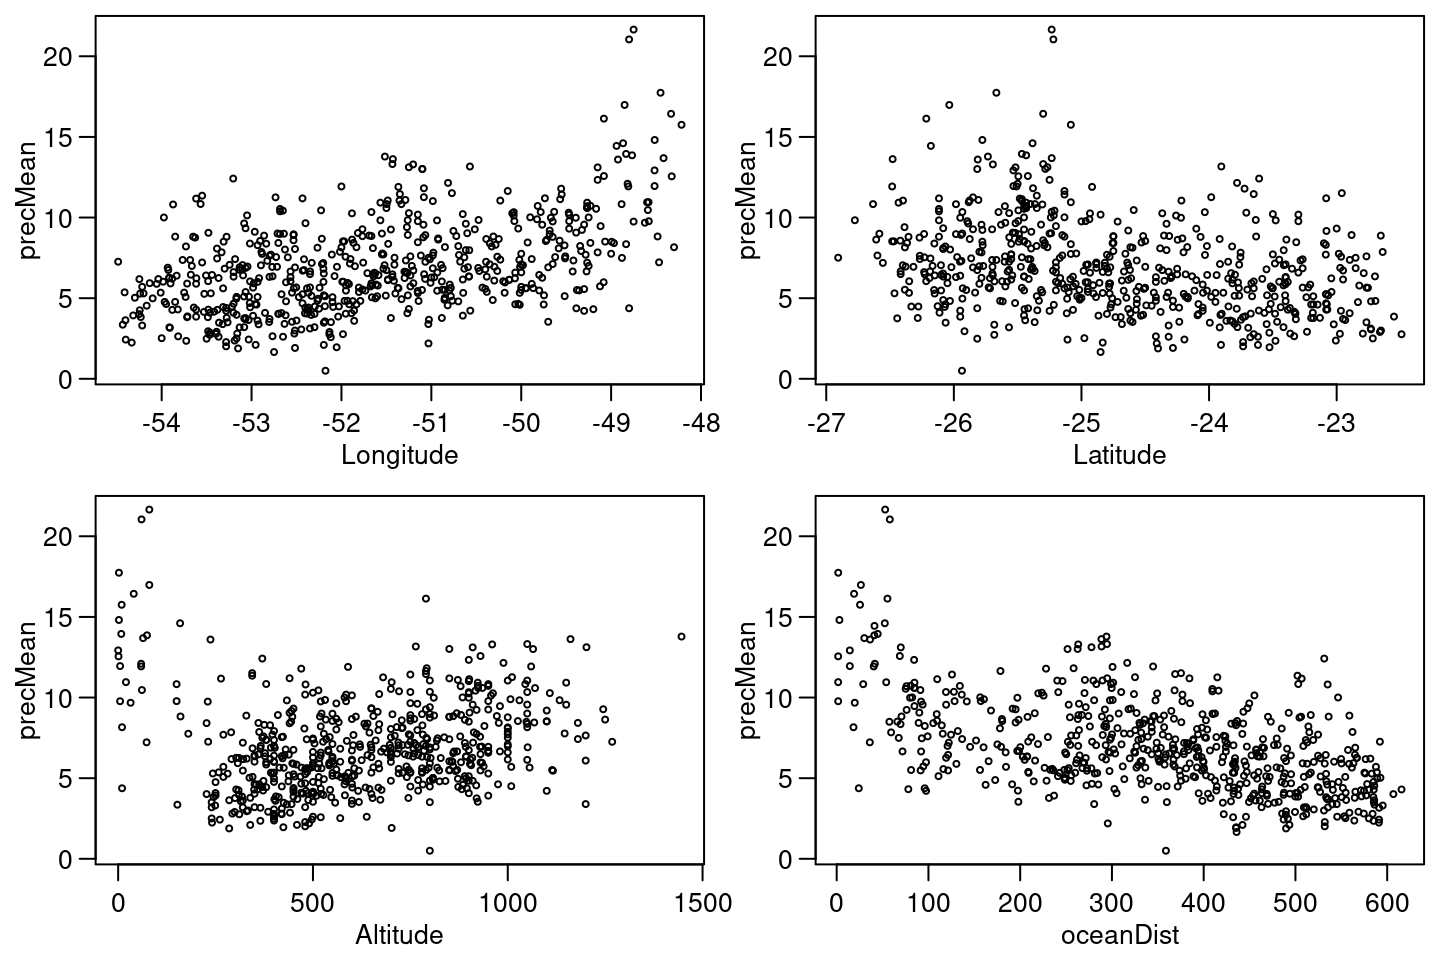 Dispersion plots of average of daily accumulated precipitation by longitude (top left), latitude (top right), altitude (bottom left) and distance to ocean (bottom right).